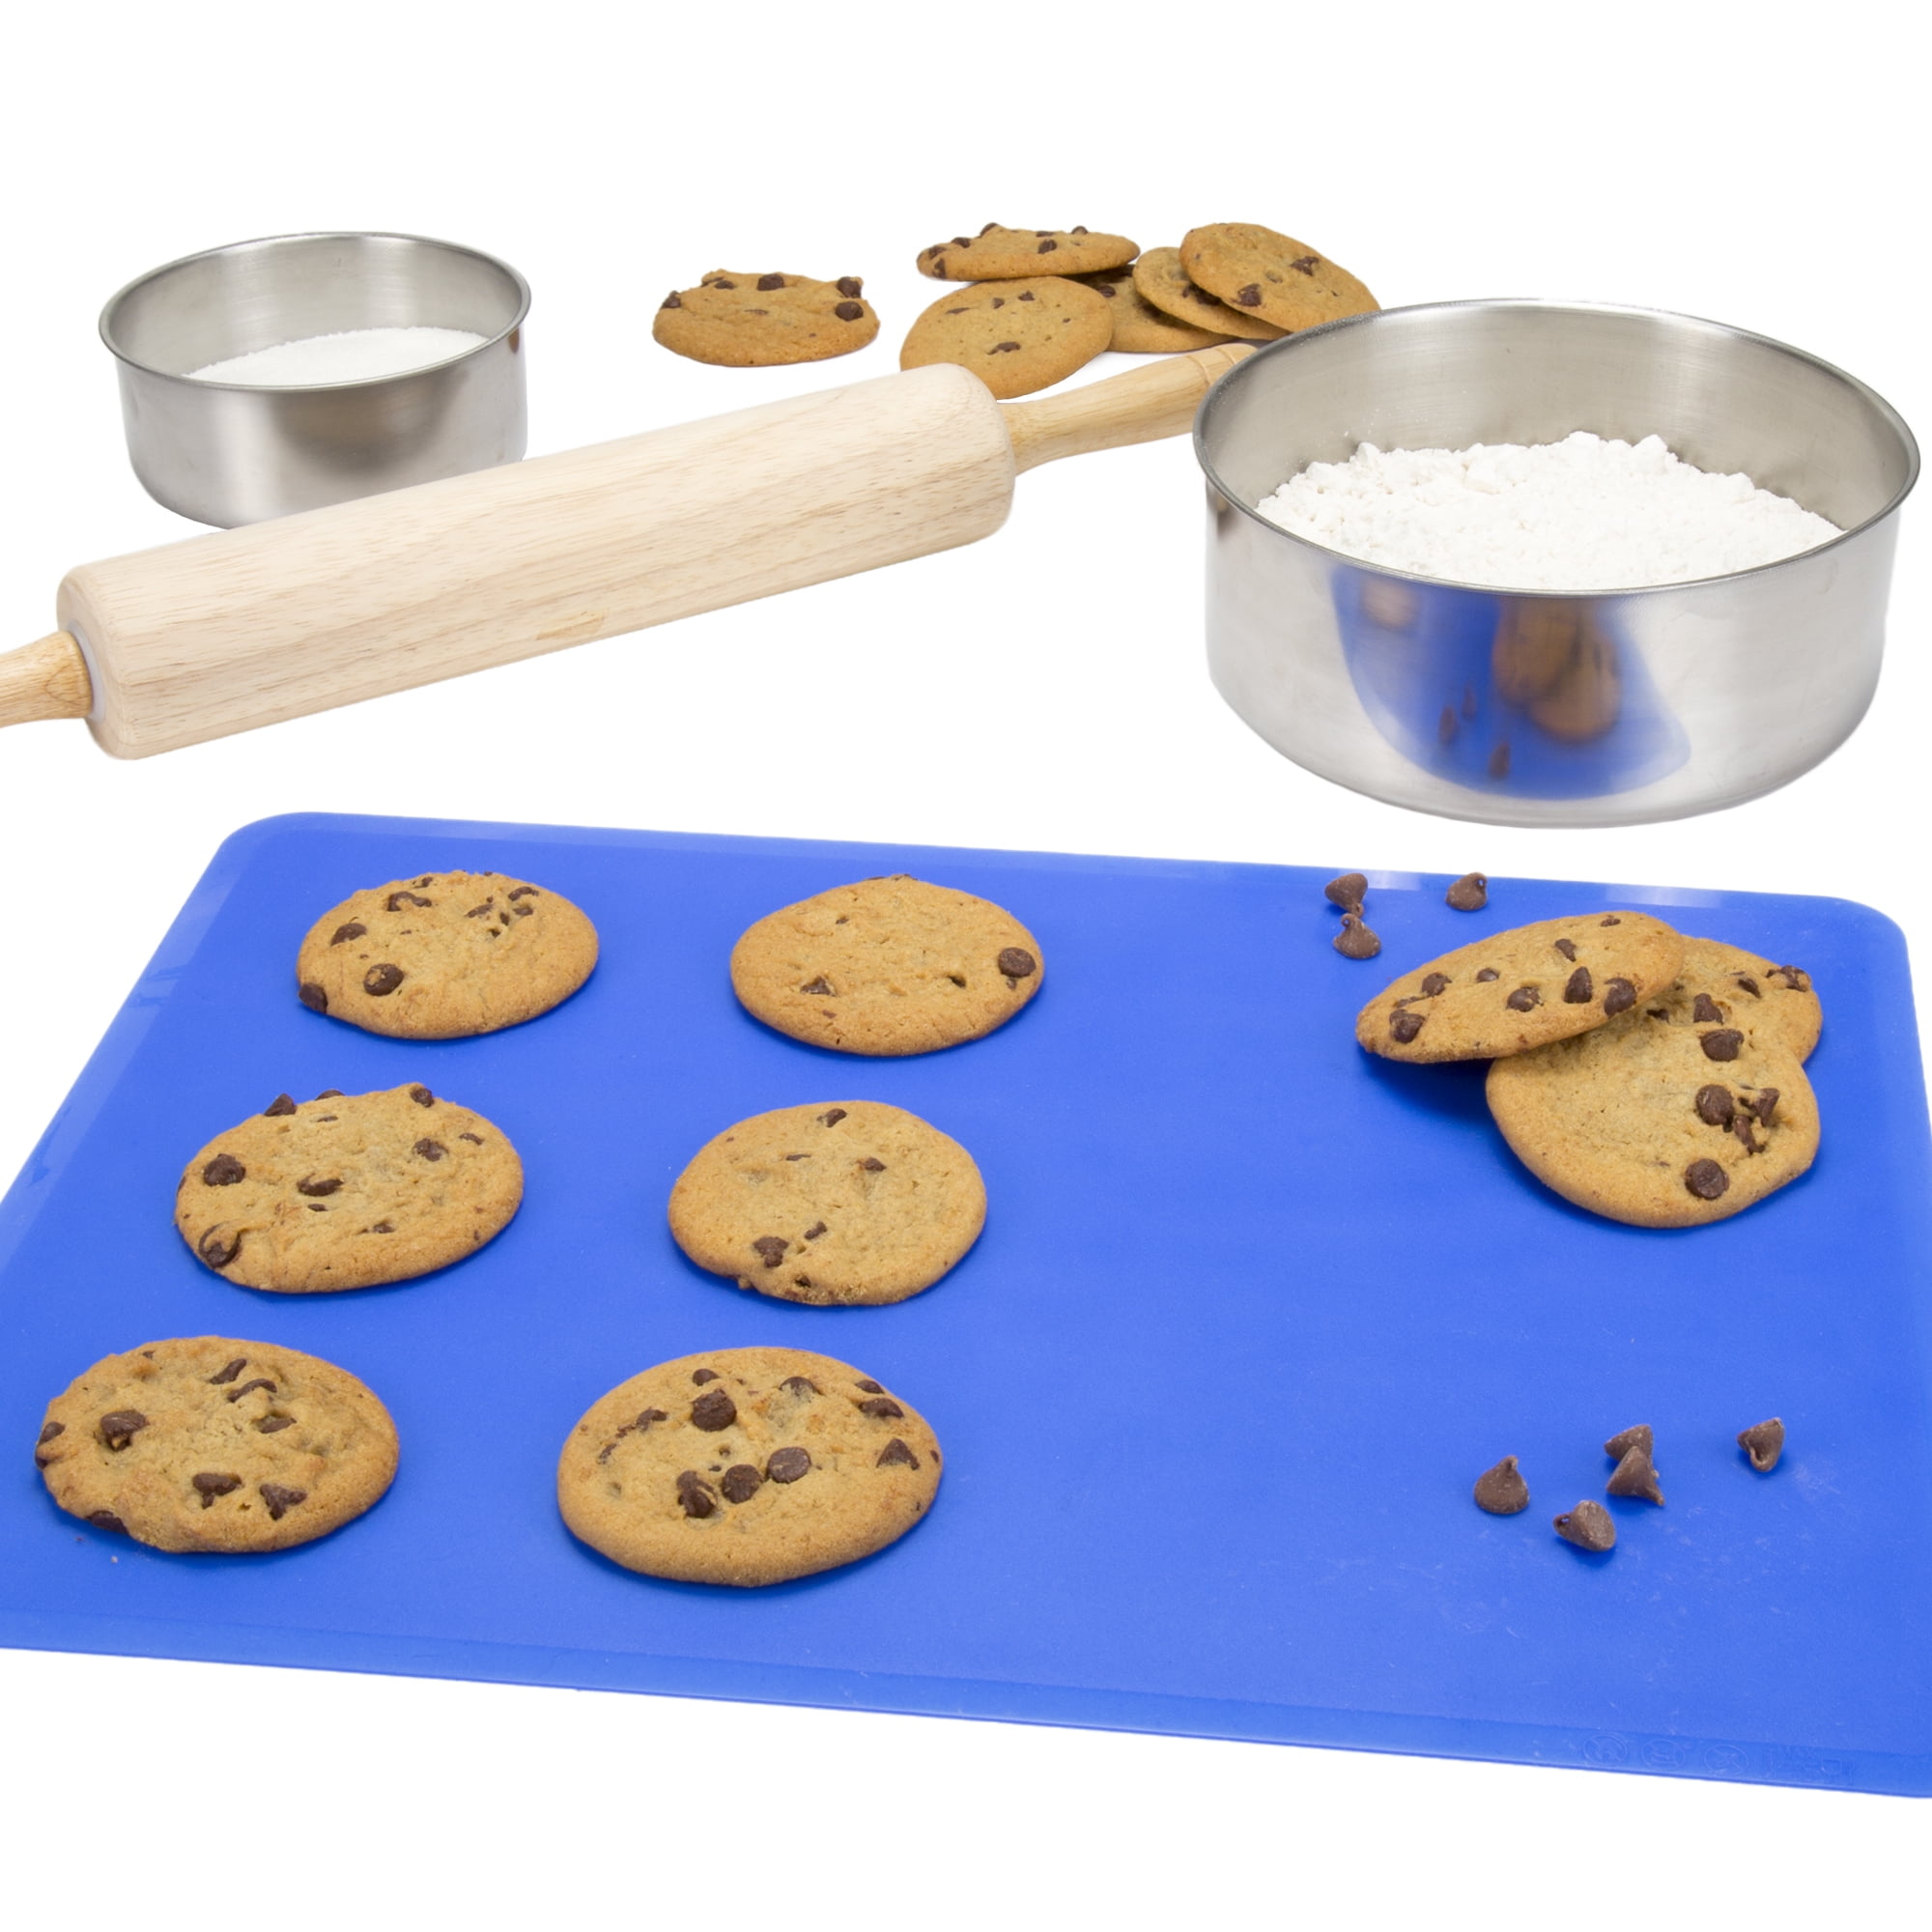 My Baking Silicone Baking Tools Set - Martinex - The Official